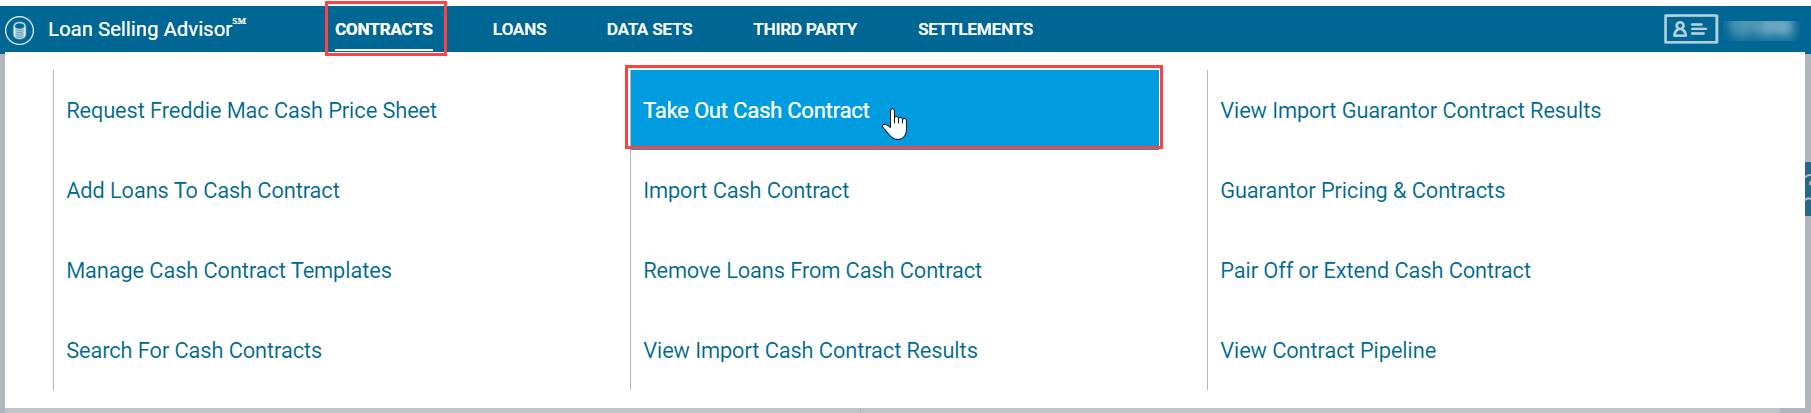 Screenshot of Loan Selling Advisor Take Out Cash Contract process